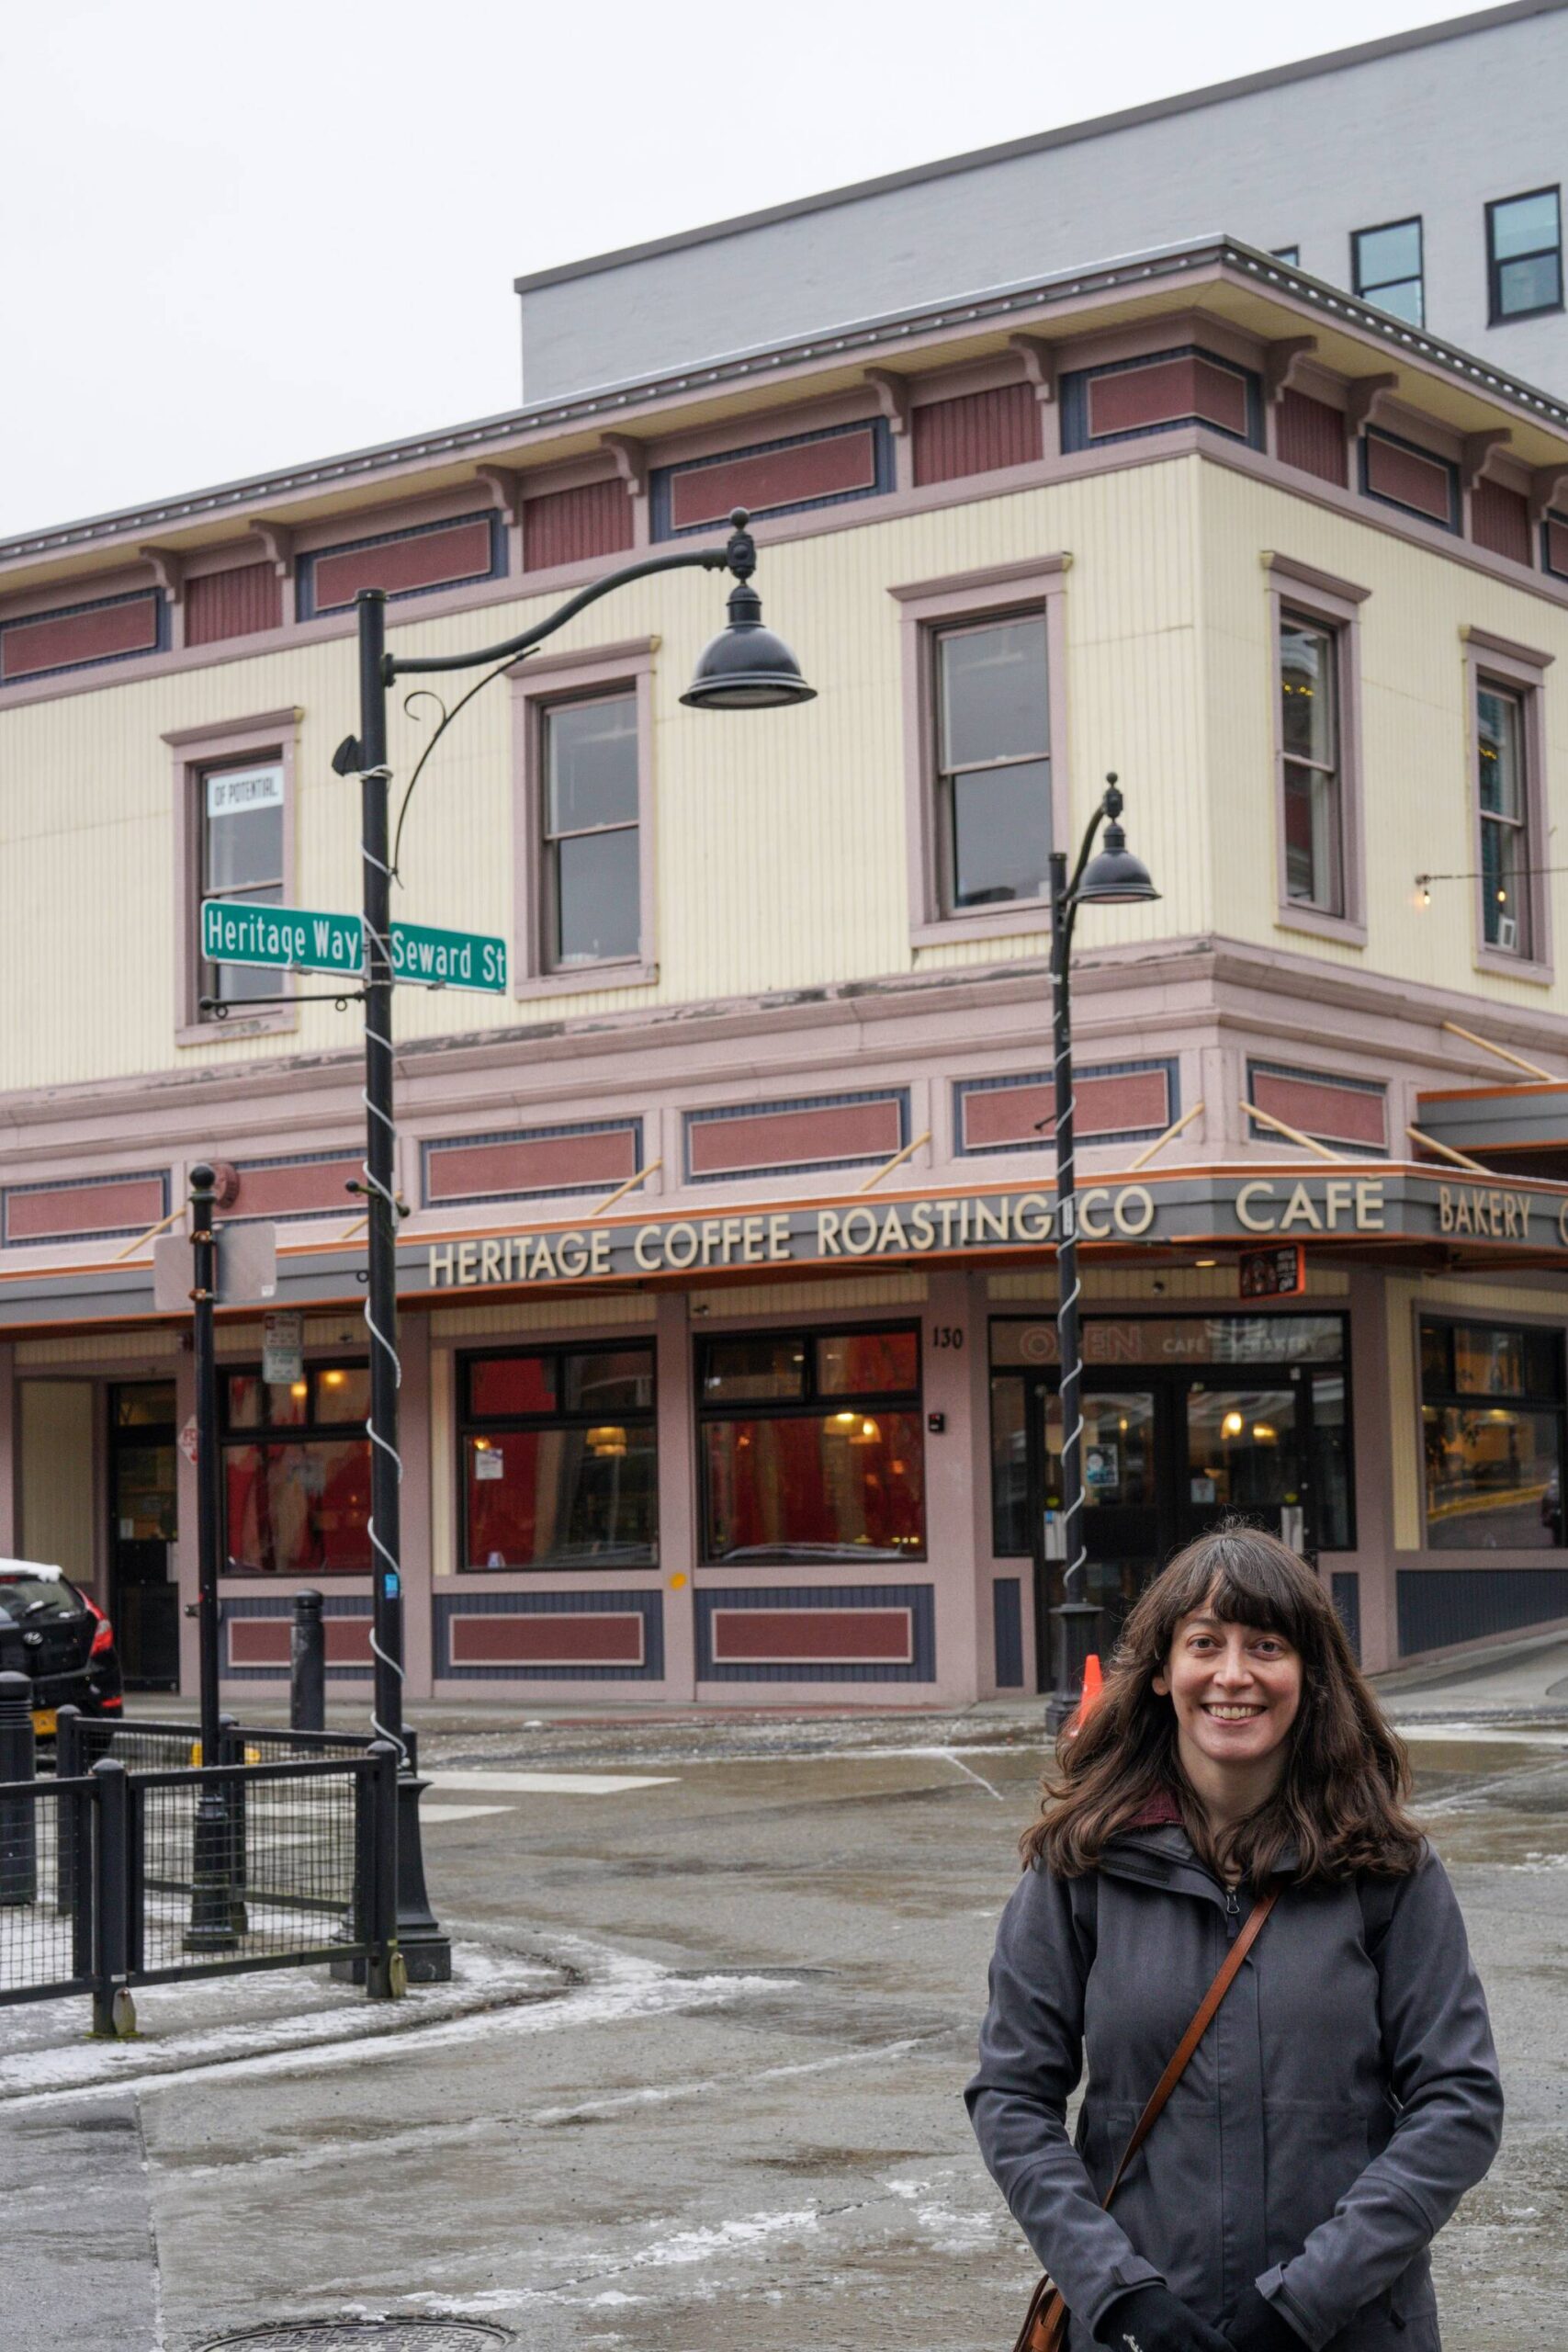 Heritage Coffee Roasting Company owner Amy Knight at the downtown cafe. (Photo by Scott Baxter)